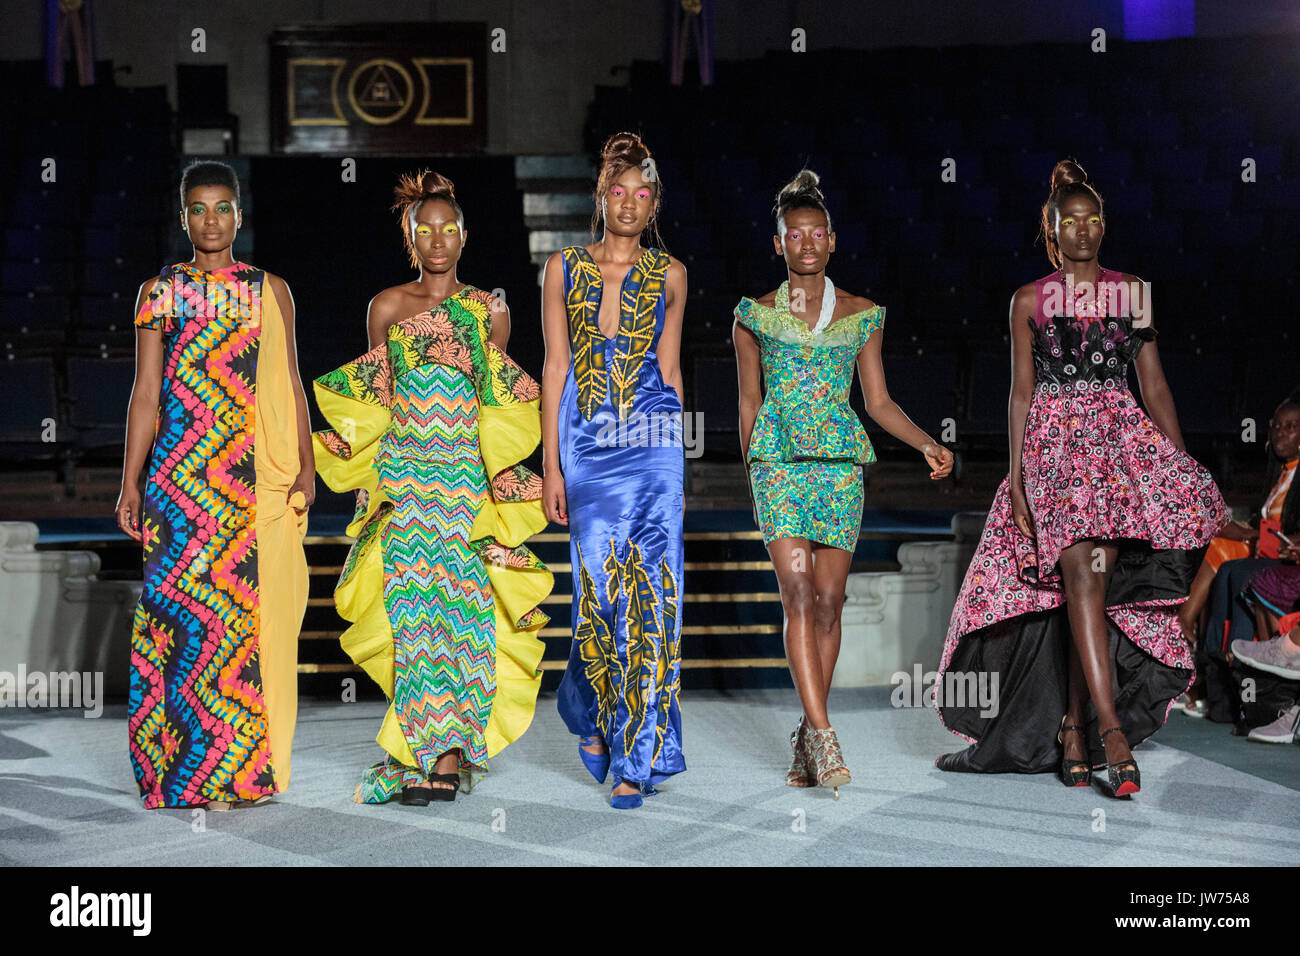 London, UK, 11th August 2017. A model on the second runway of the day, with designs by Godwin Green, Araewa, Bijelly, Regallia, Maufechi, Monami 4 Moremi, Kola Kuddus. Since debuting in 2011, the two day Africa Fashion Week London, AFWL, has grown into one of the largest Africa inspired fashion events in Europe. Stock Photo